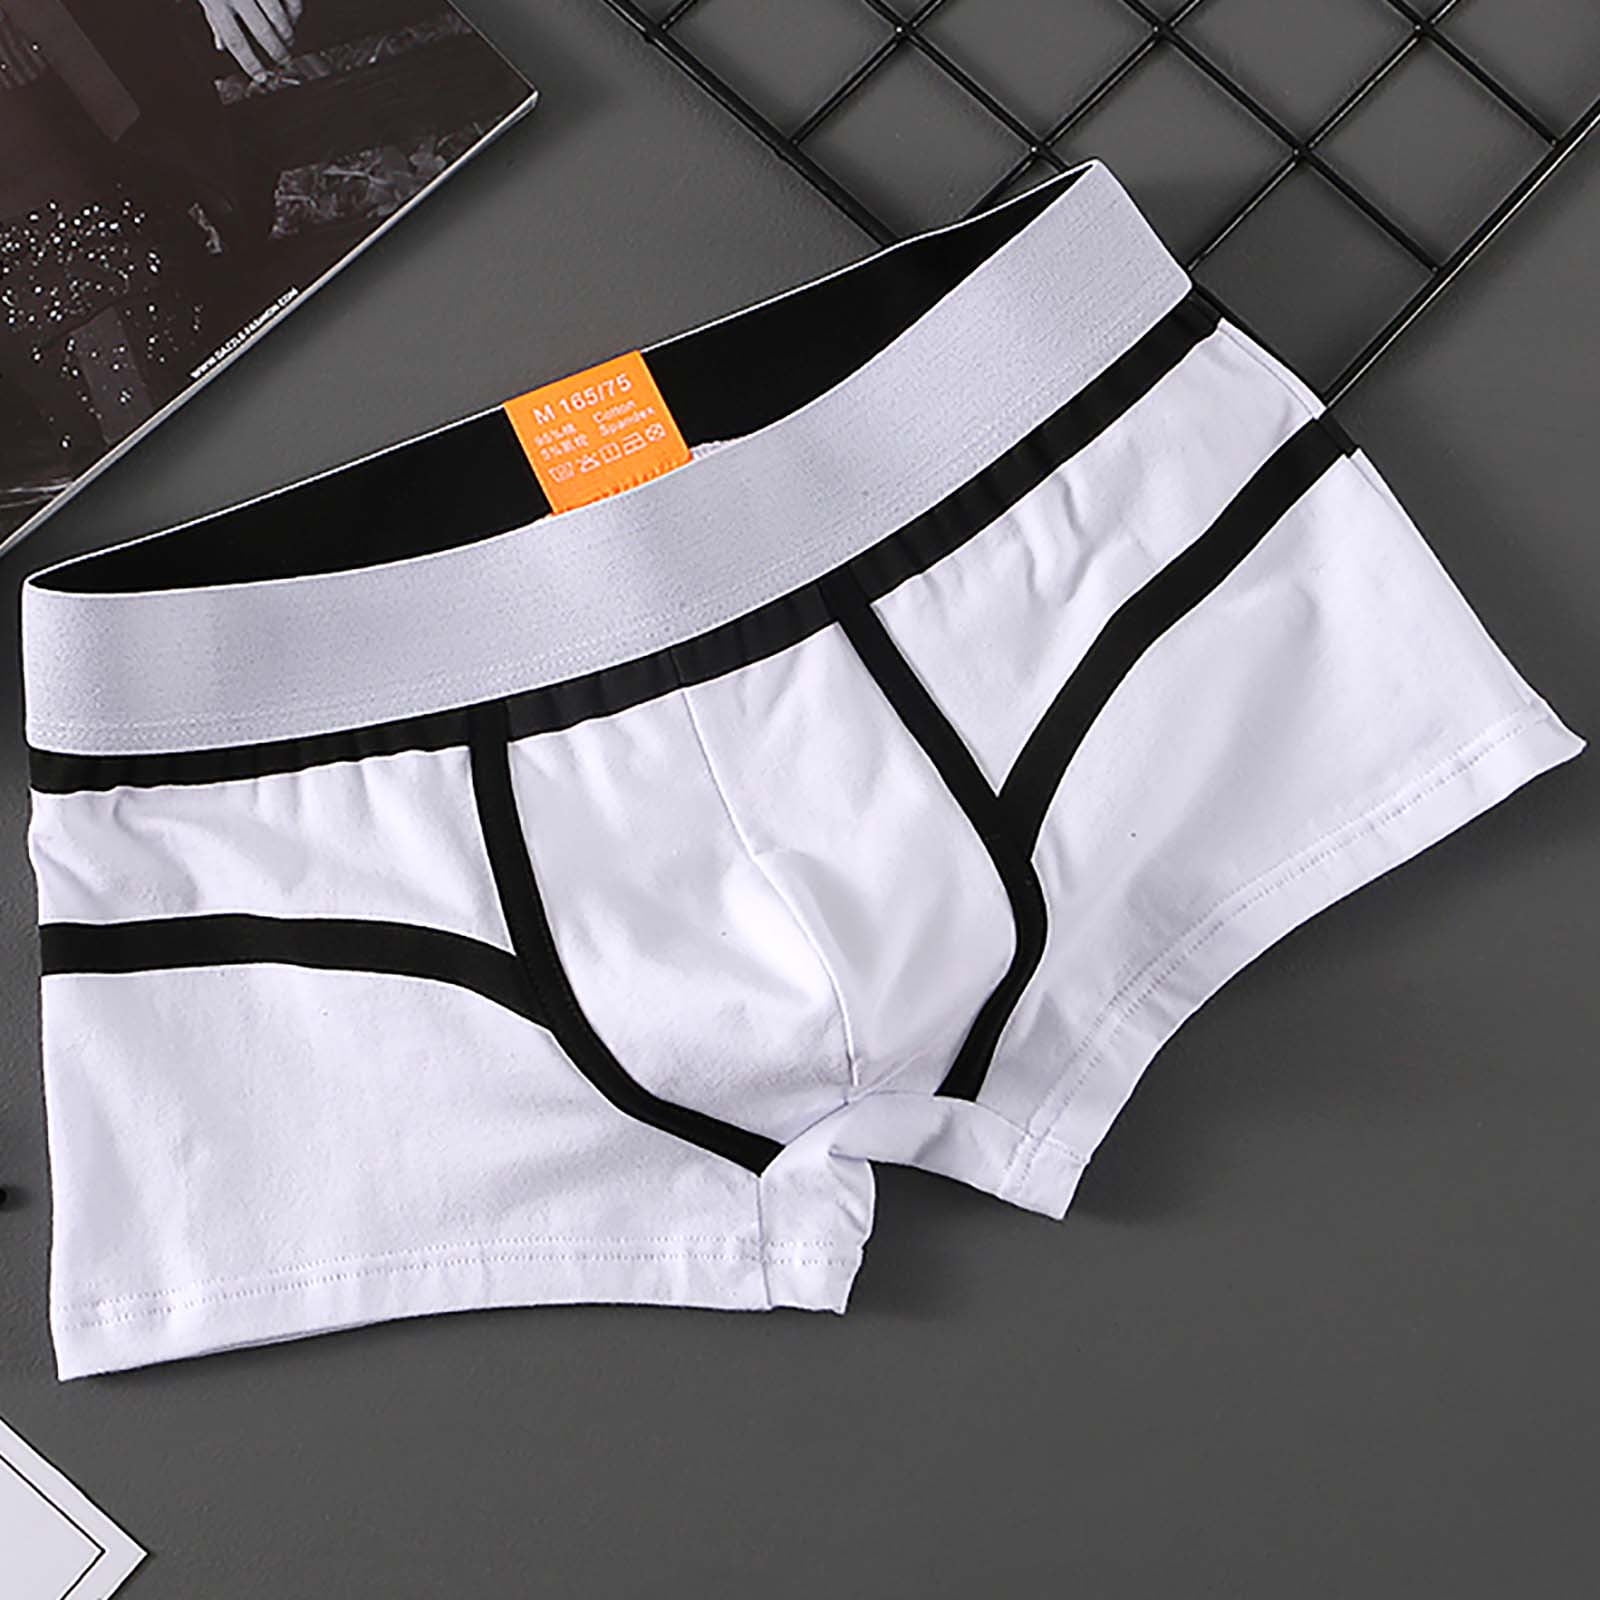 Kayannuo Cotton Underwear For Women Christmas Clearance Pregnant